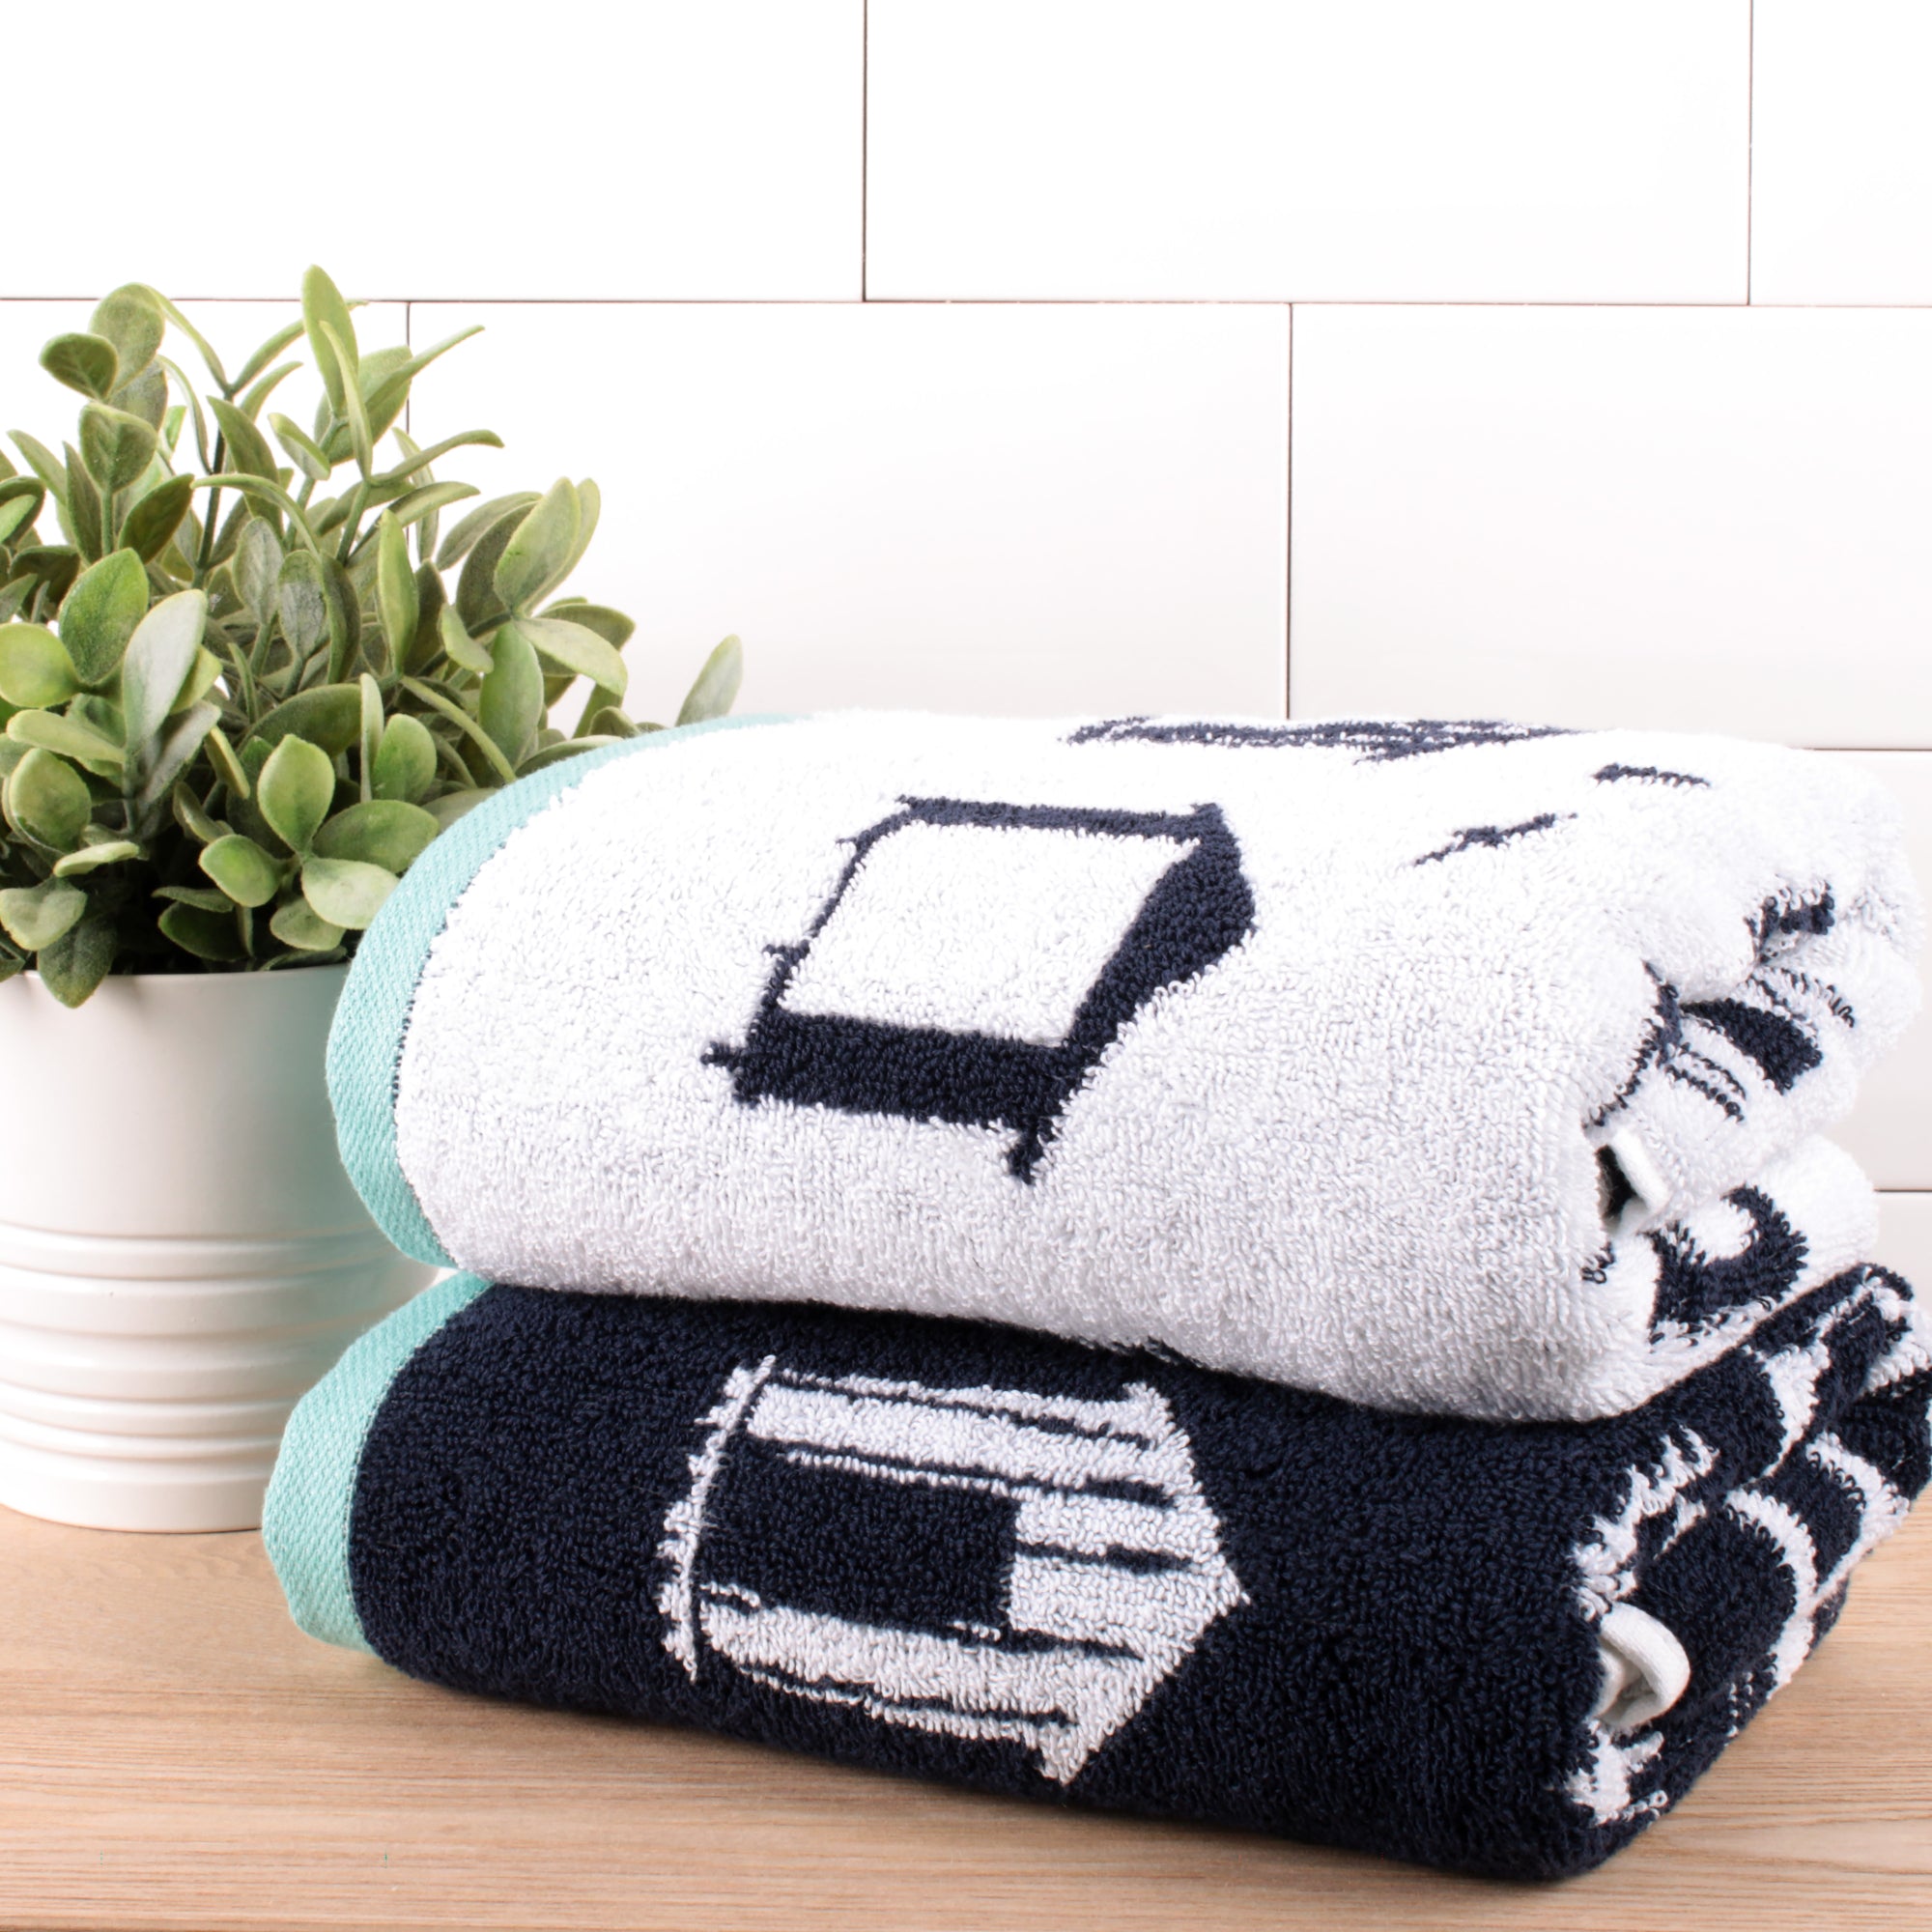 Hand Towel (2 pack) Beach Huts by Fusion in Navy